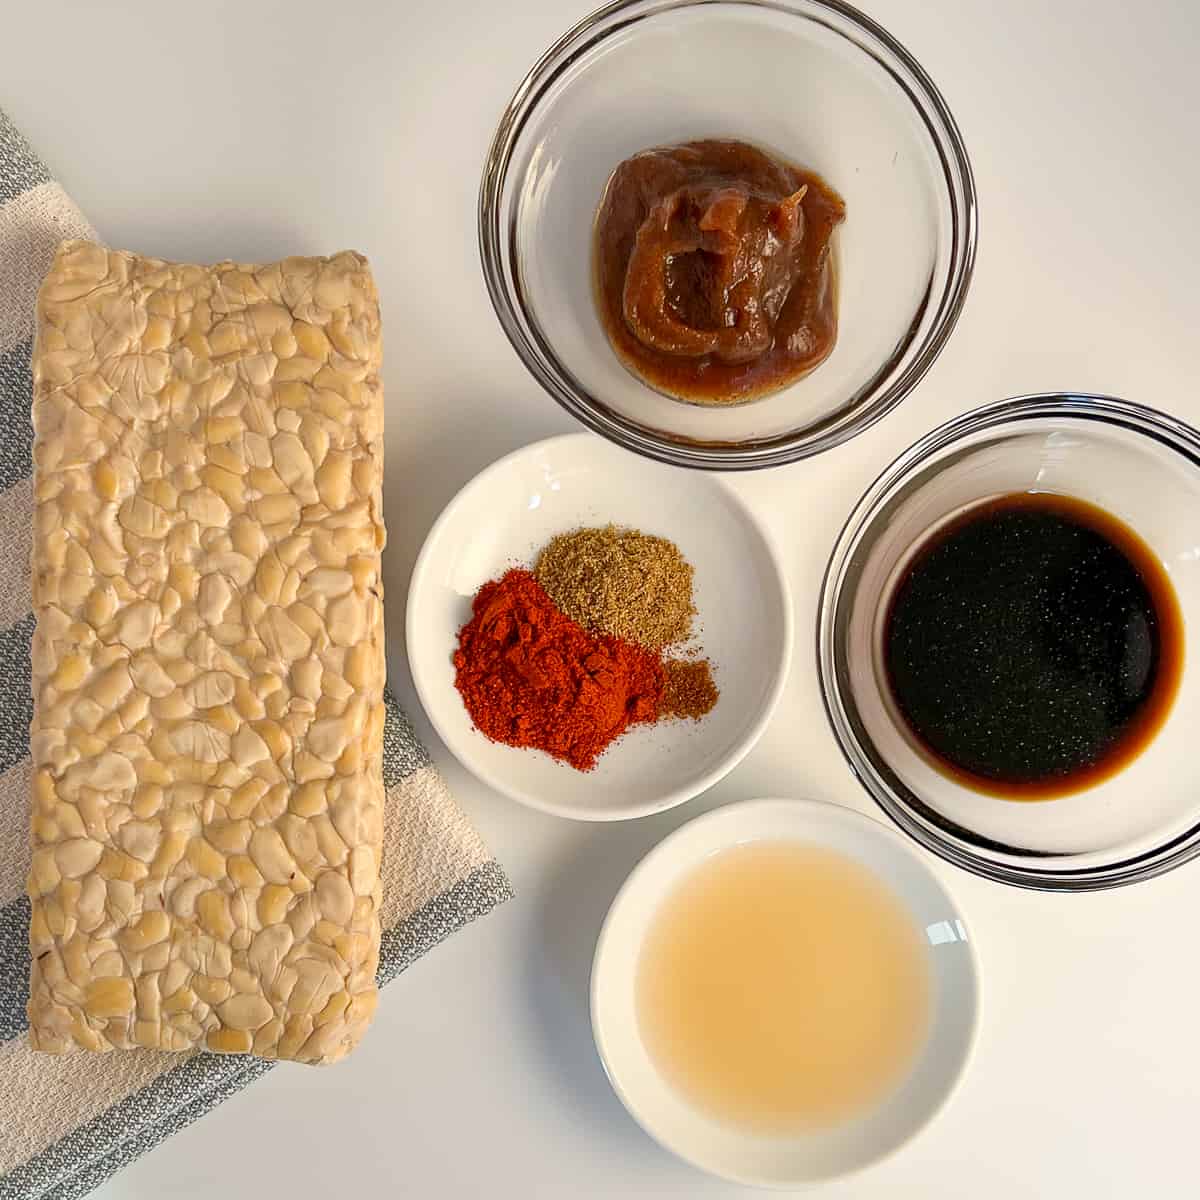 top view of the key ingredients for tempeh bacon: block of tempeh, simple homemade date syrup, coconut aminos, apple cider vinegar, and spices